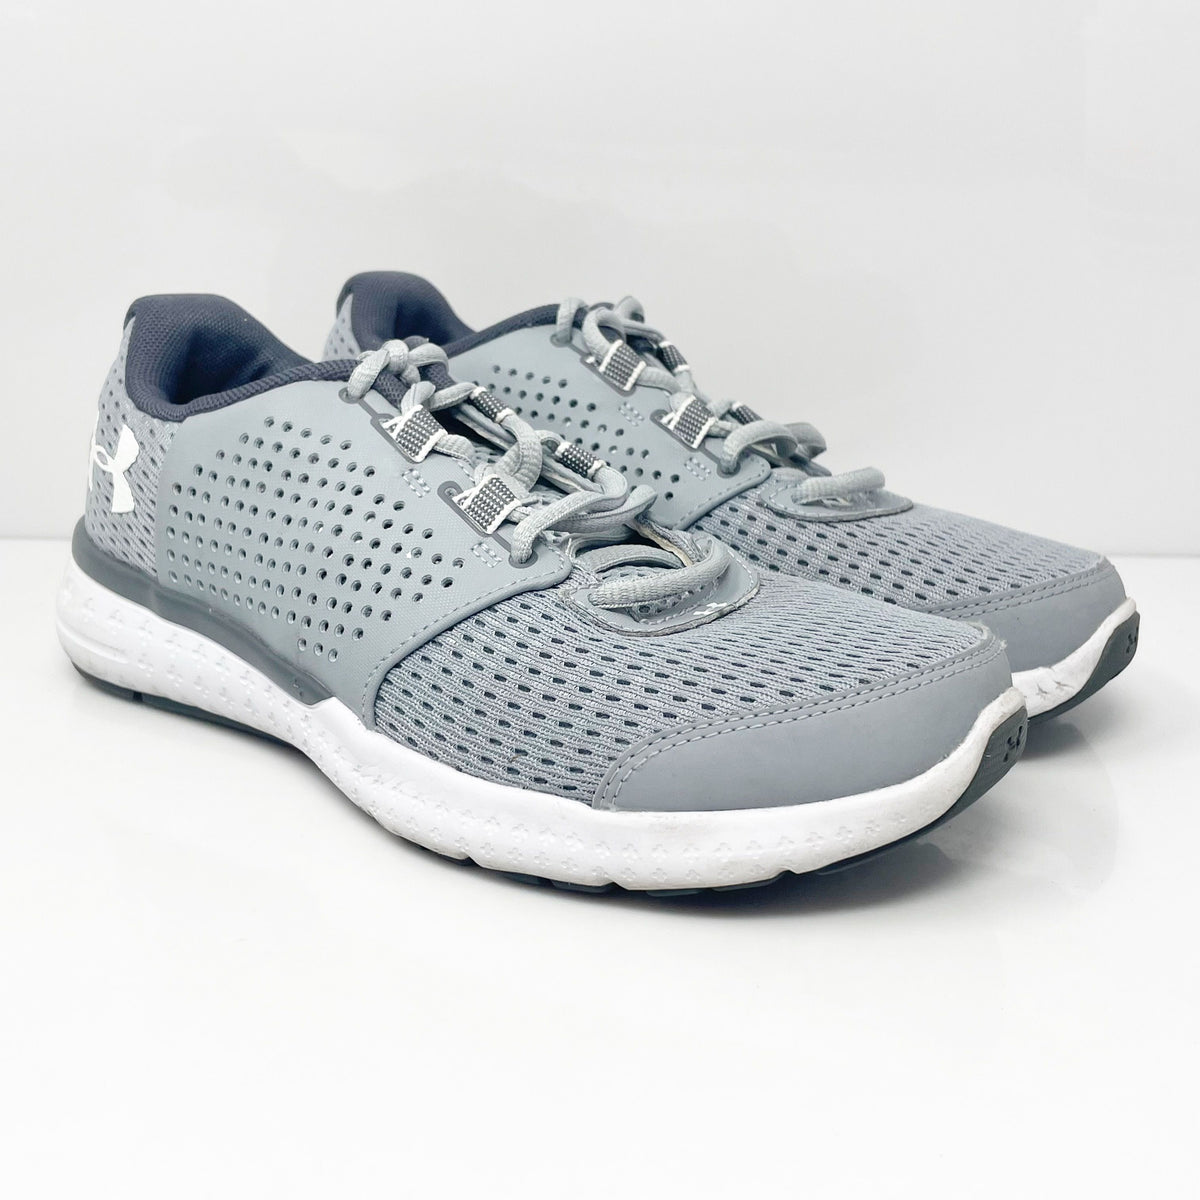 Humanista Confinar Sur oeste Under Armour Womens Micro G Fuel RN 1285487-942 Gray Running Shoes Sne–  SneakerCycle